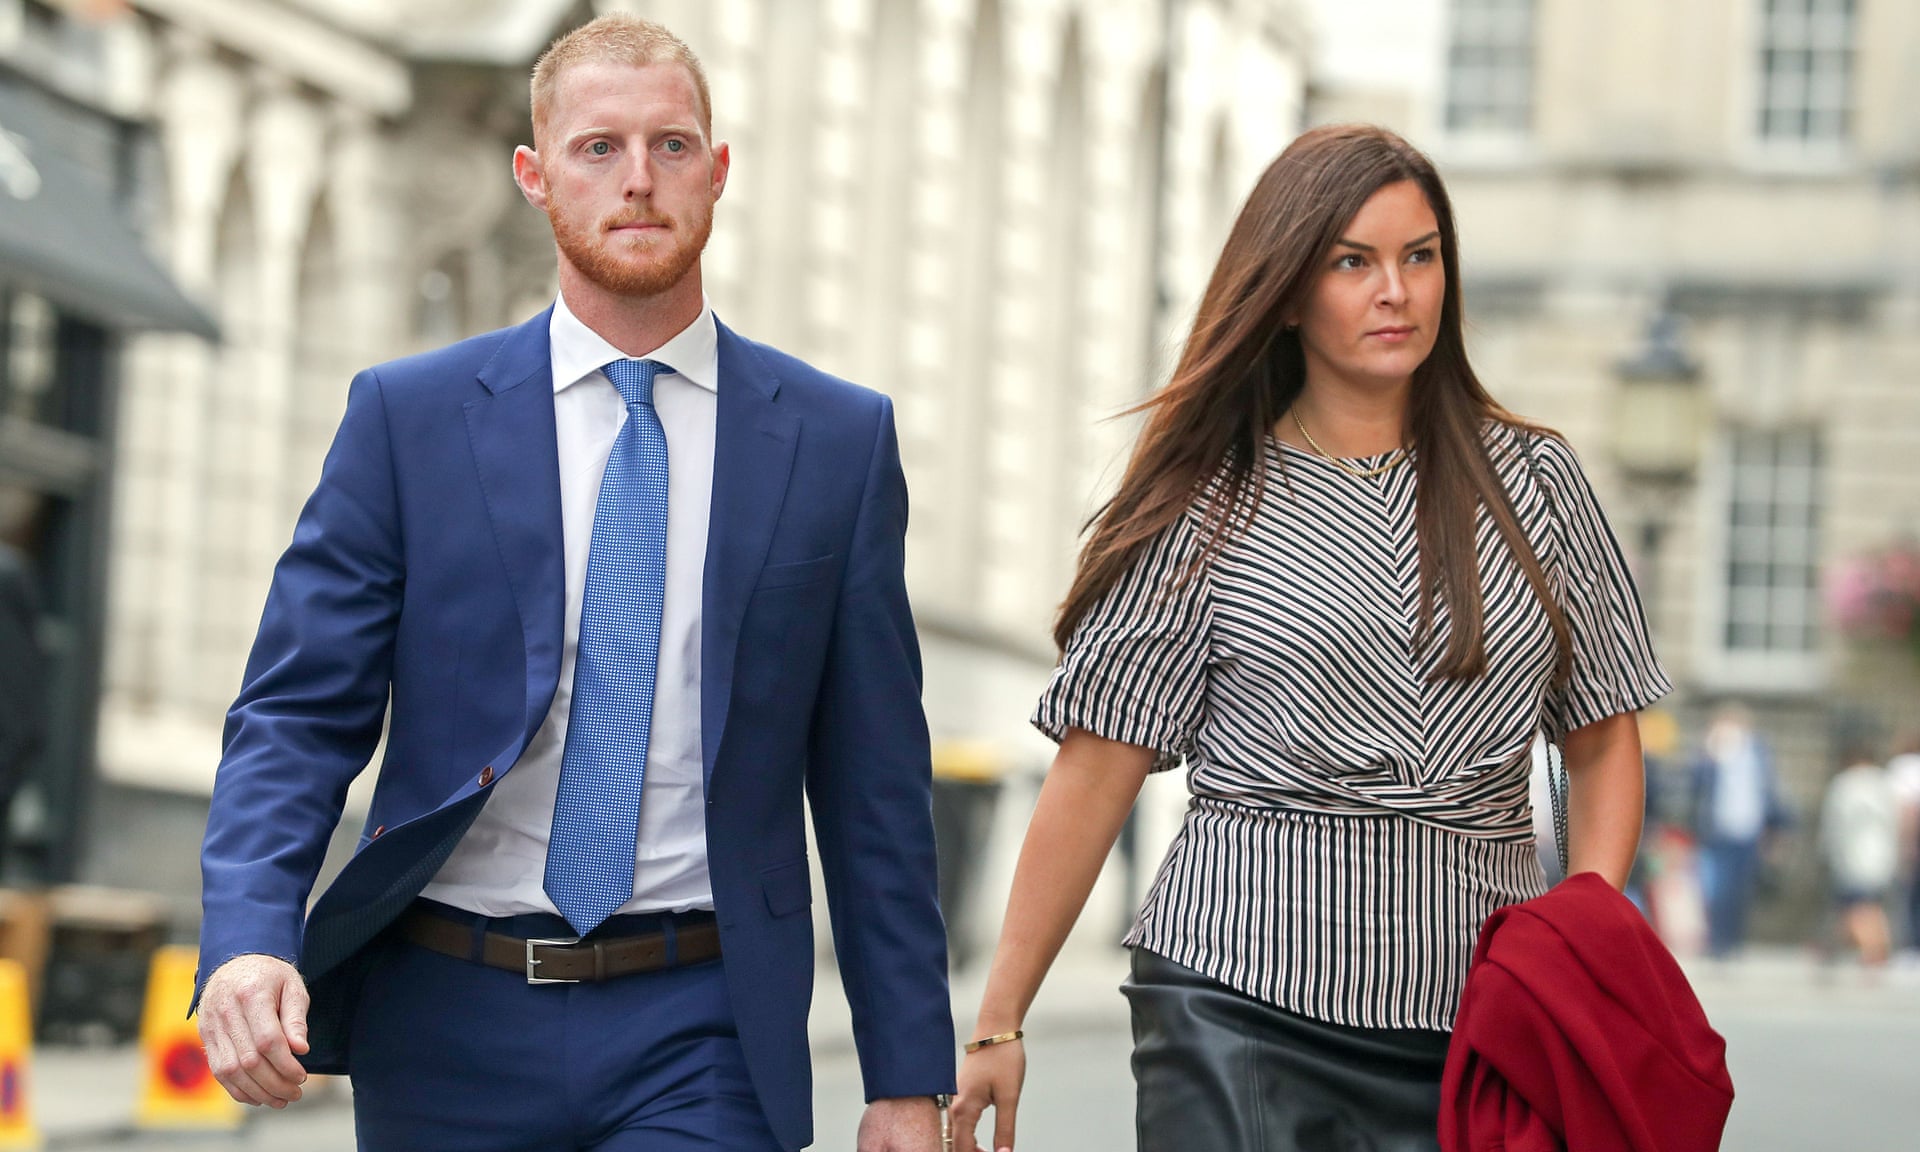 Ben Stokes’s wife Clare Stokes speaks about Face Grab photos